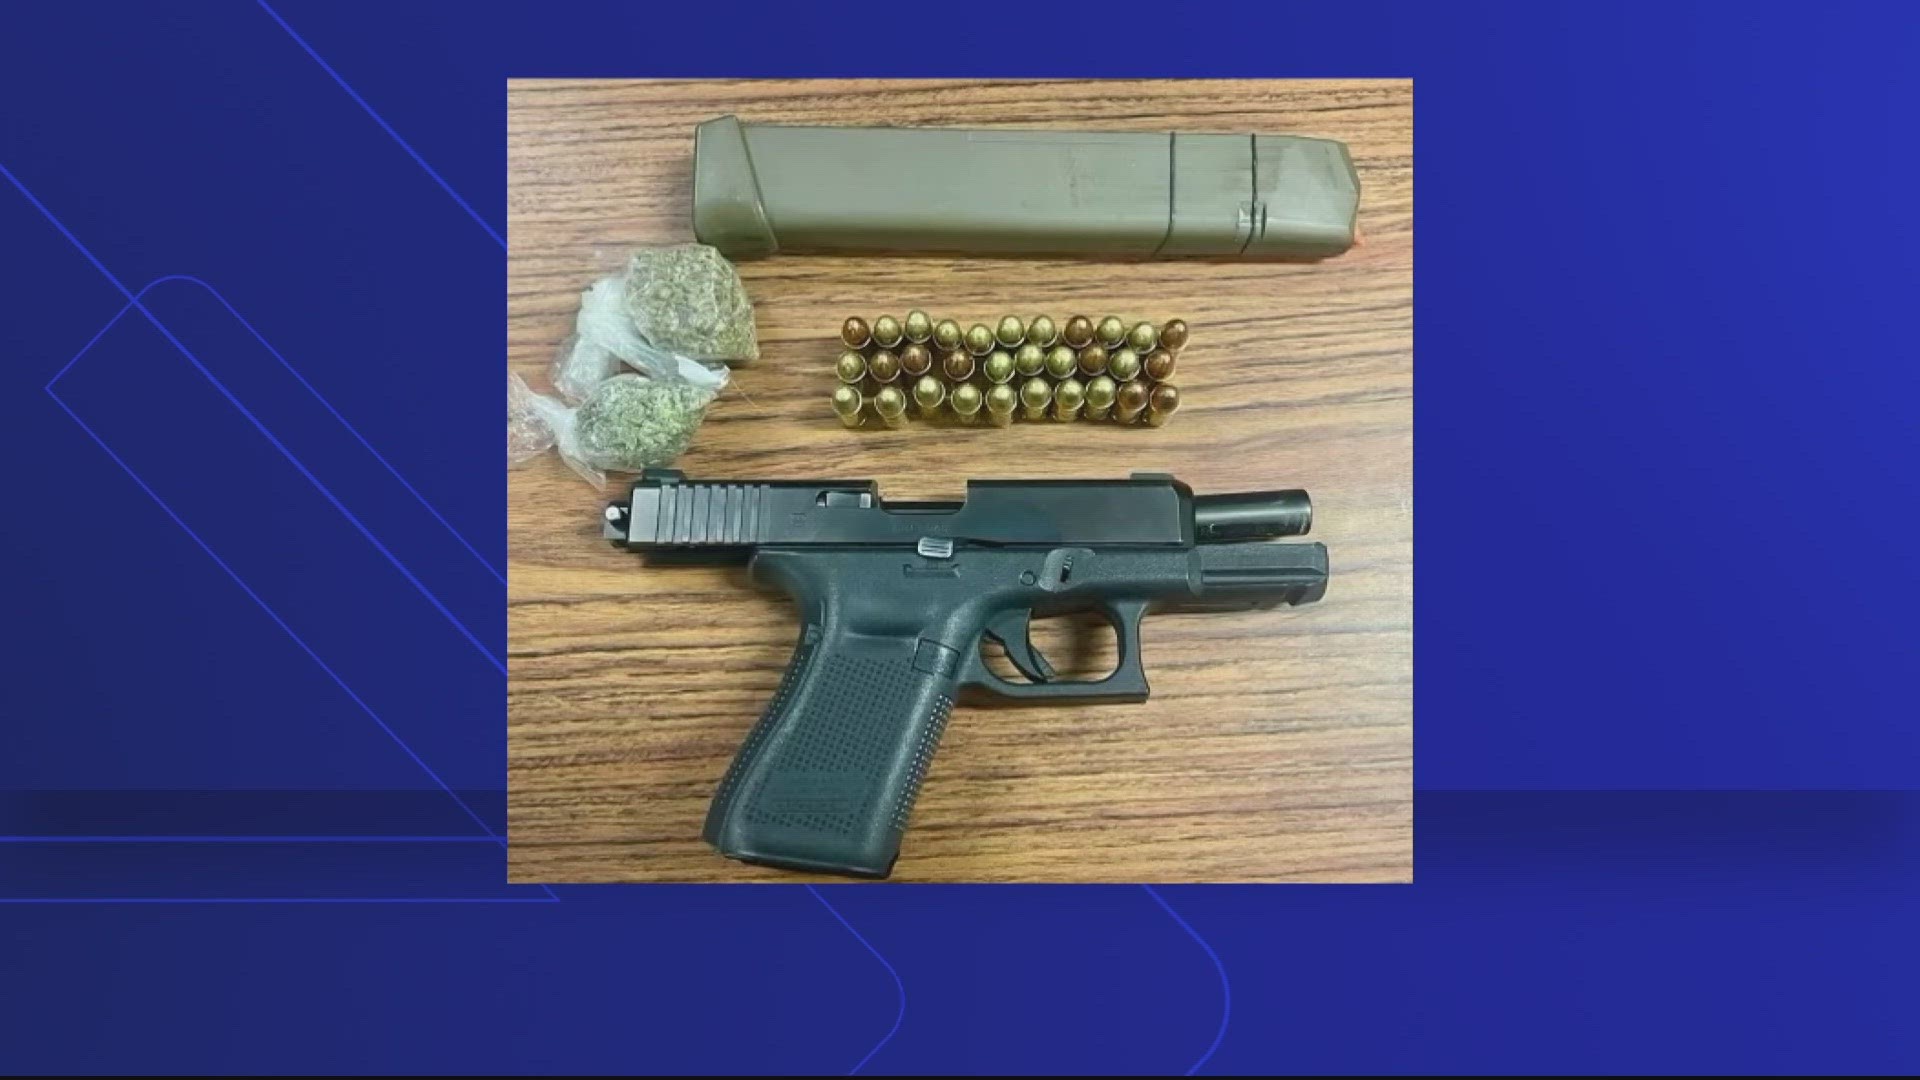 A Fairmont Heights High School student is being charged as an adult after being caught with drugs and a gun.